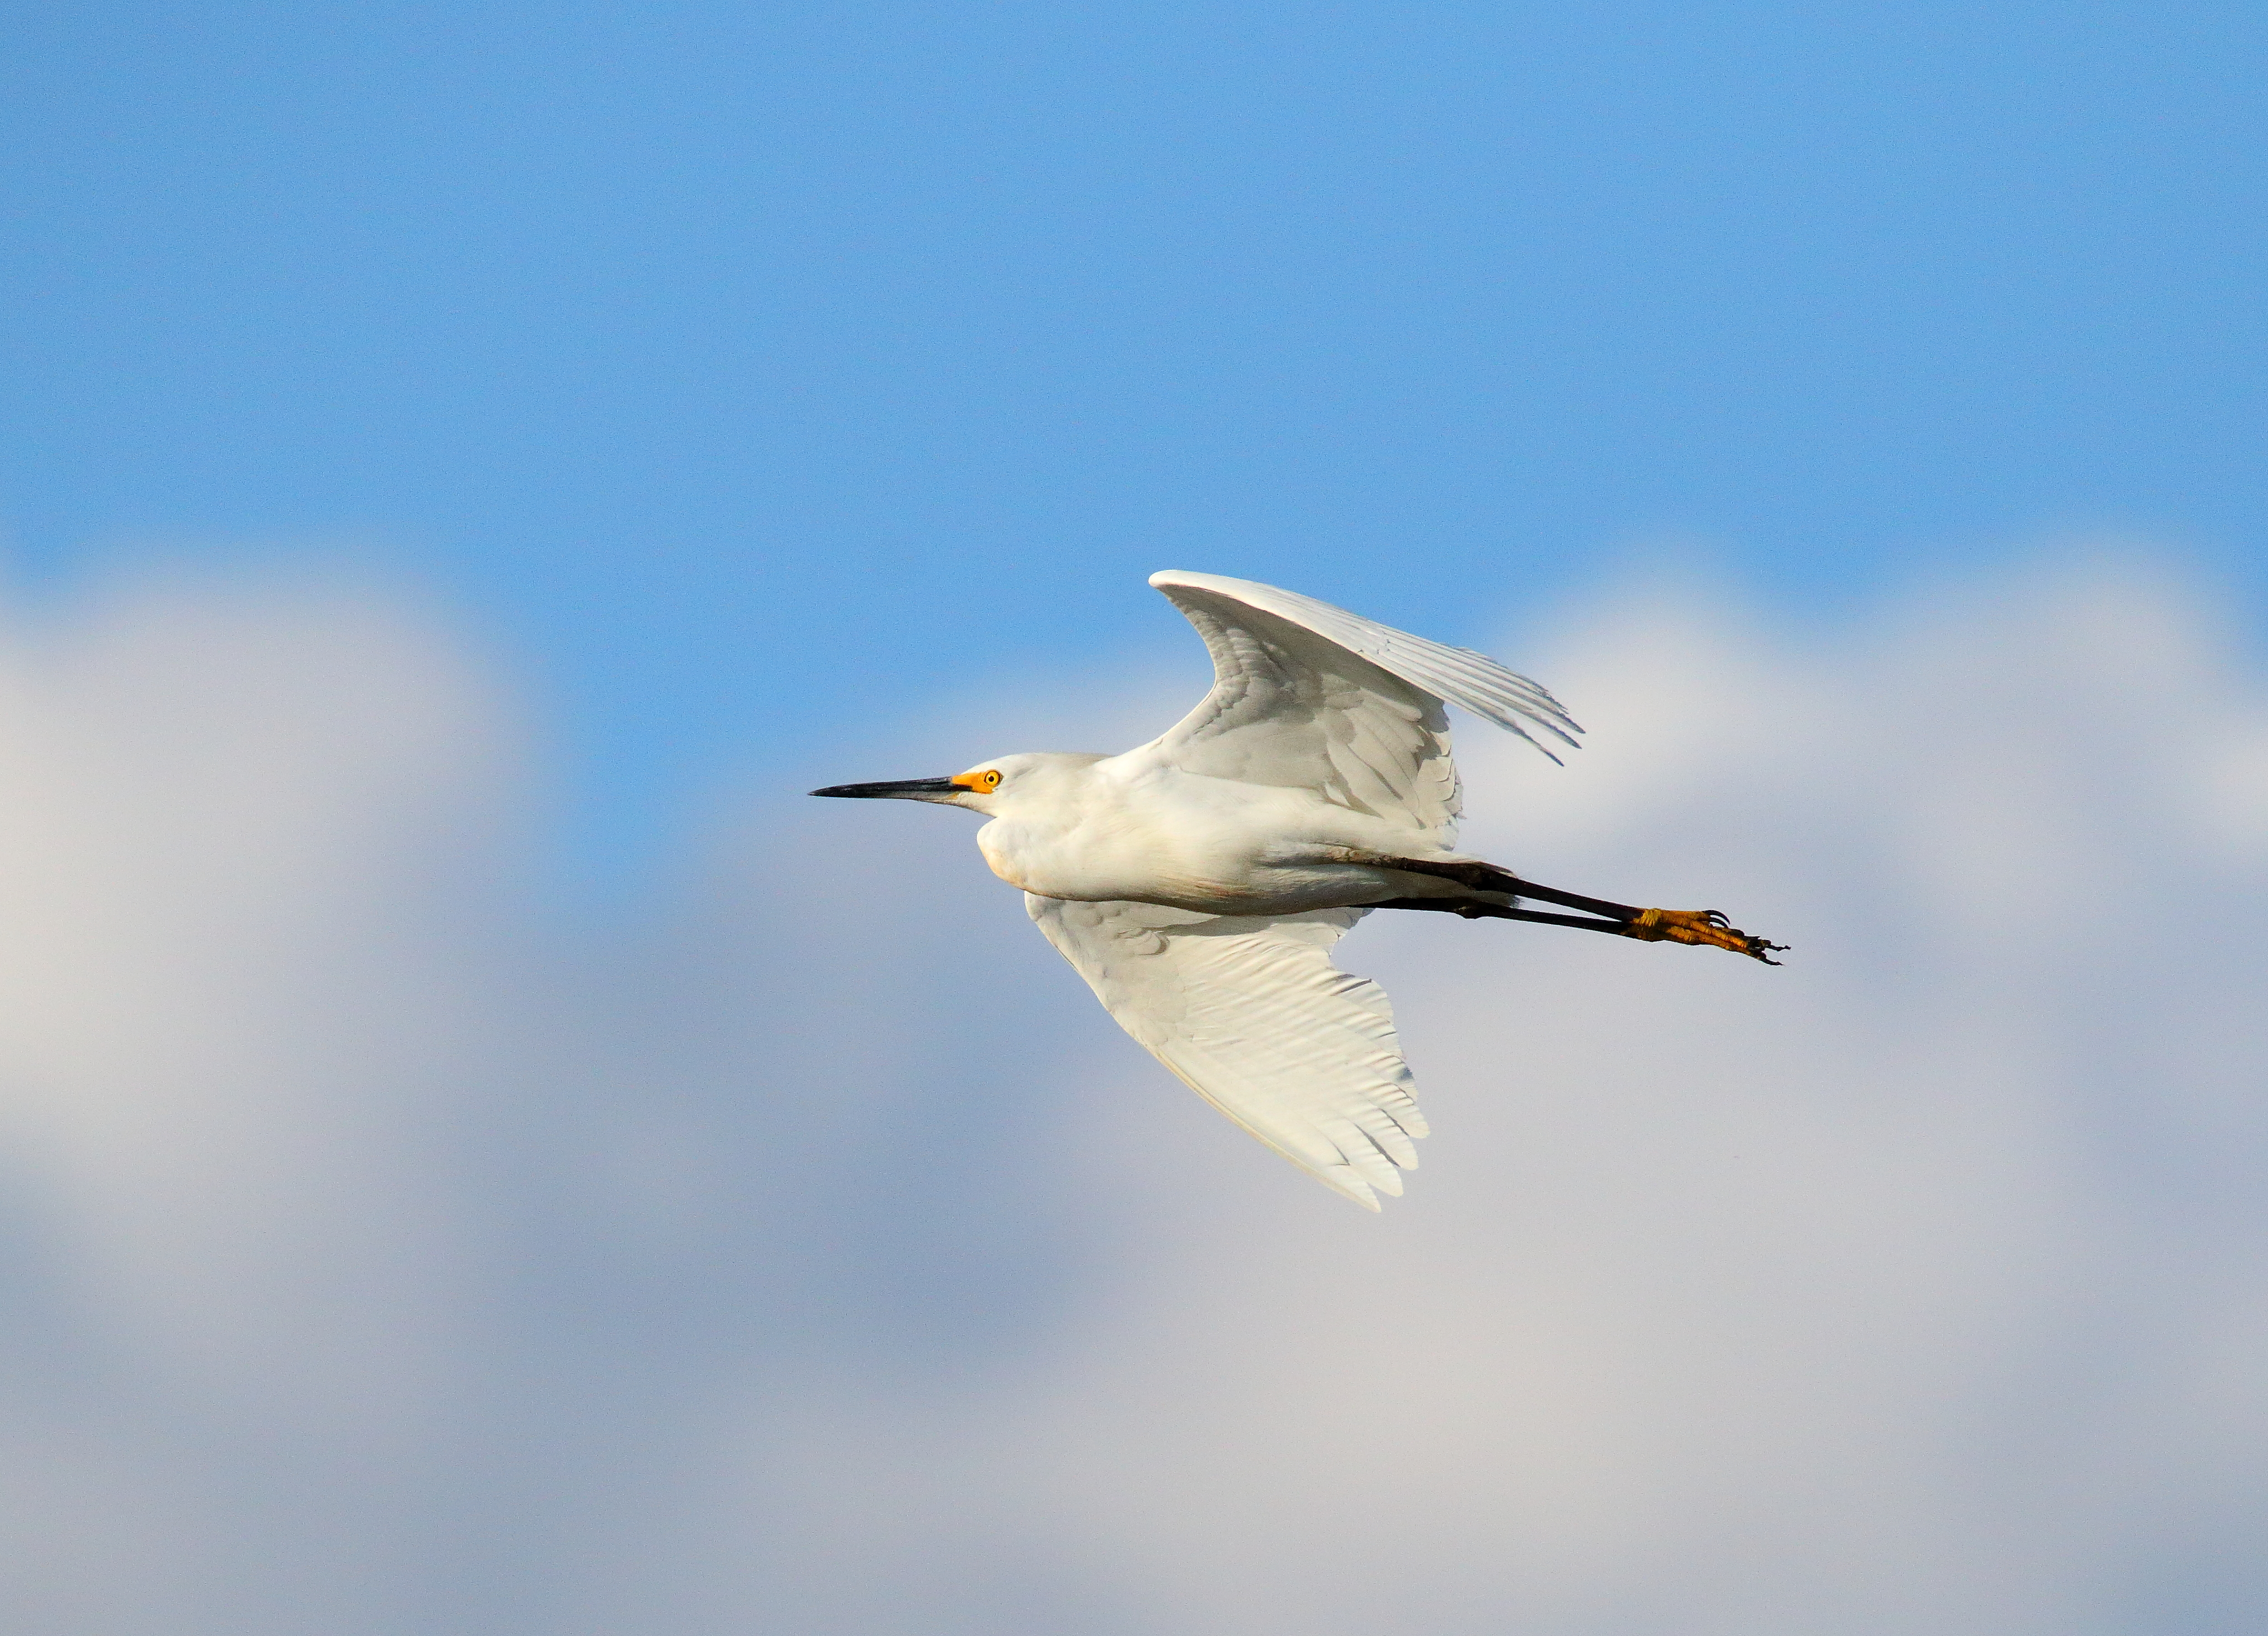 Snowy Egrets and othe waders come to forage at Goethals Bridge Pond. Photo: Isaac Grant